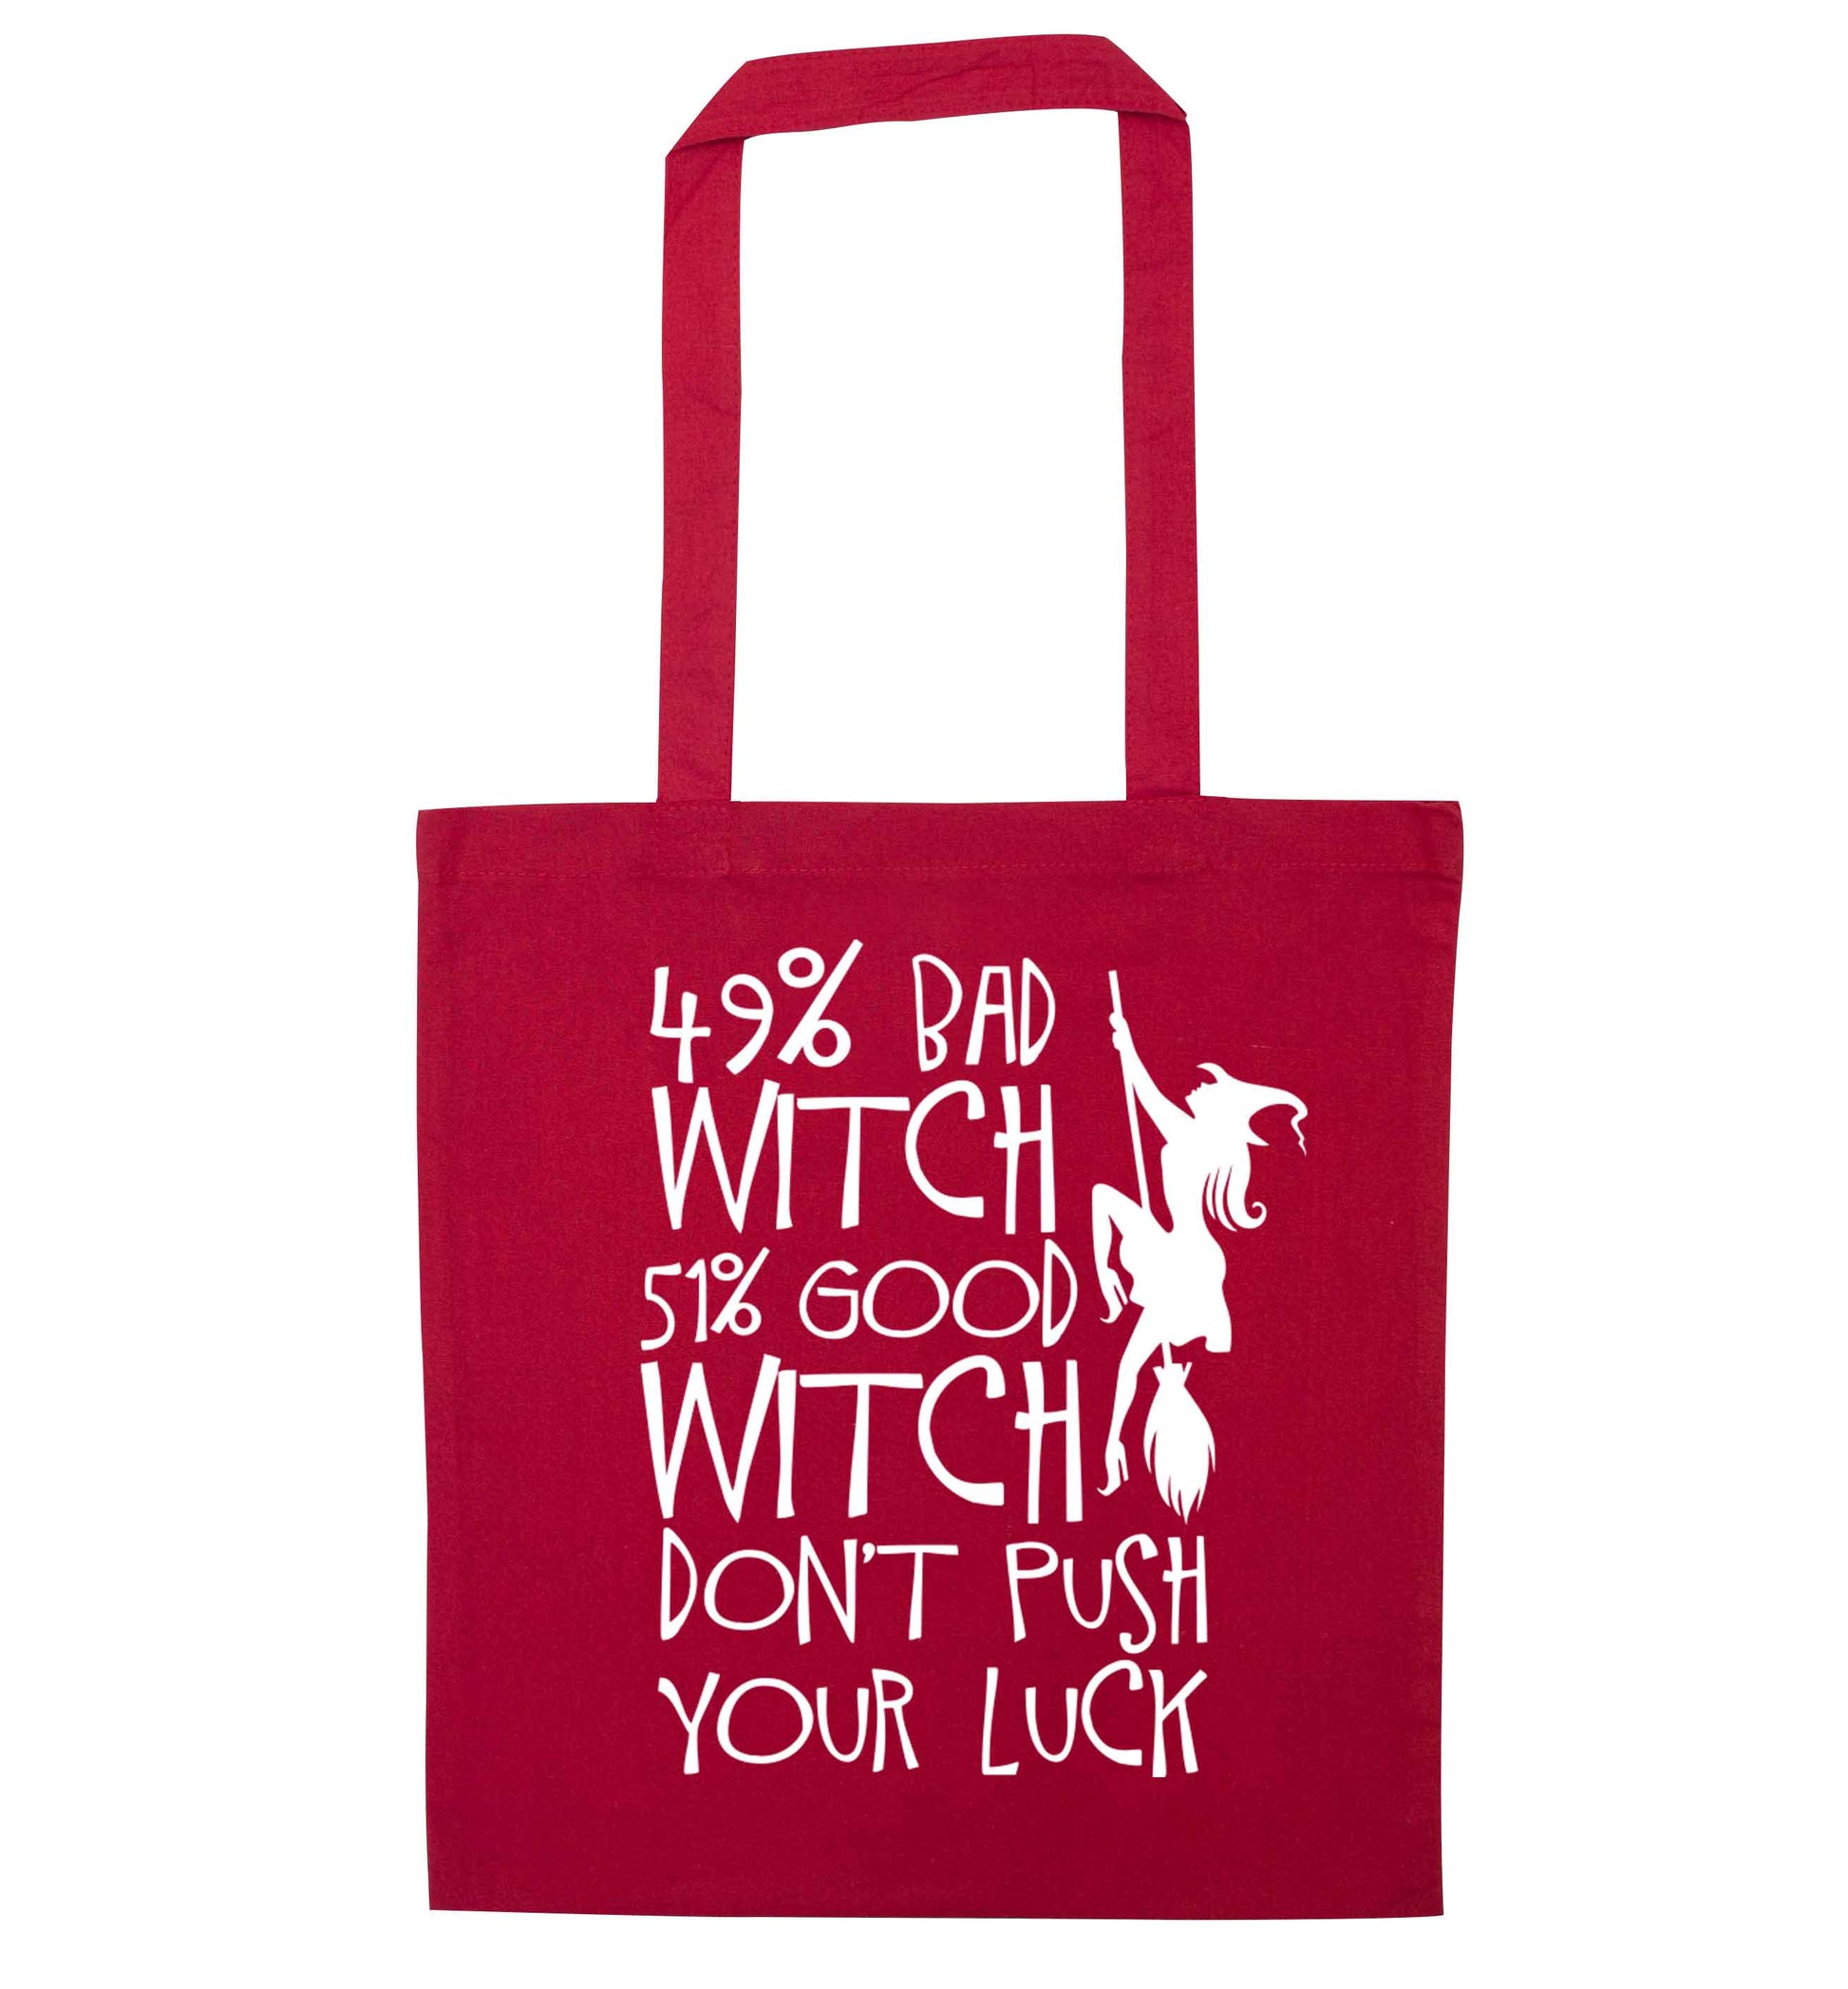 49% bad witch 51% good witch don't push your luck red tote bag